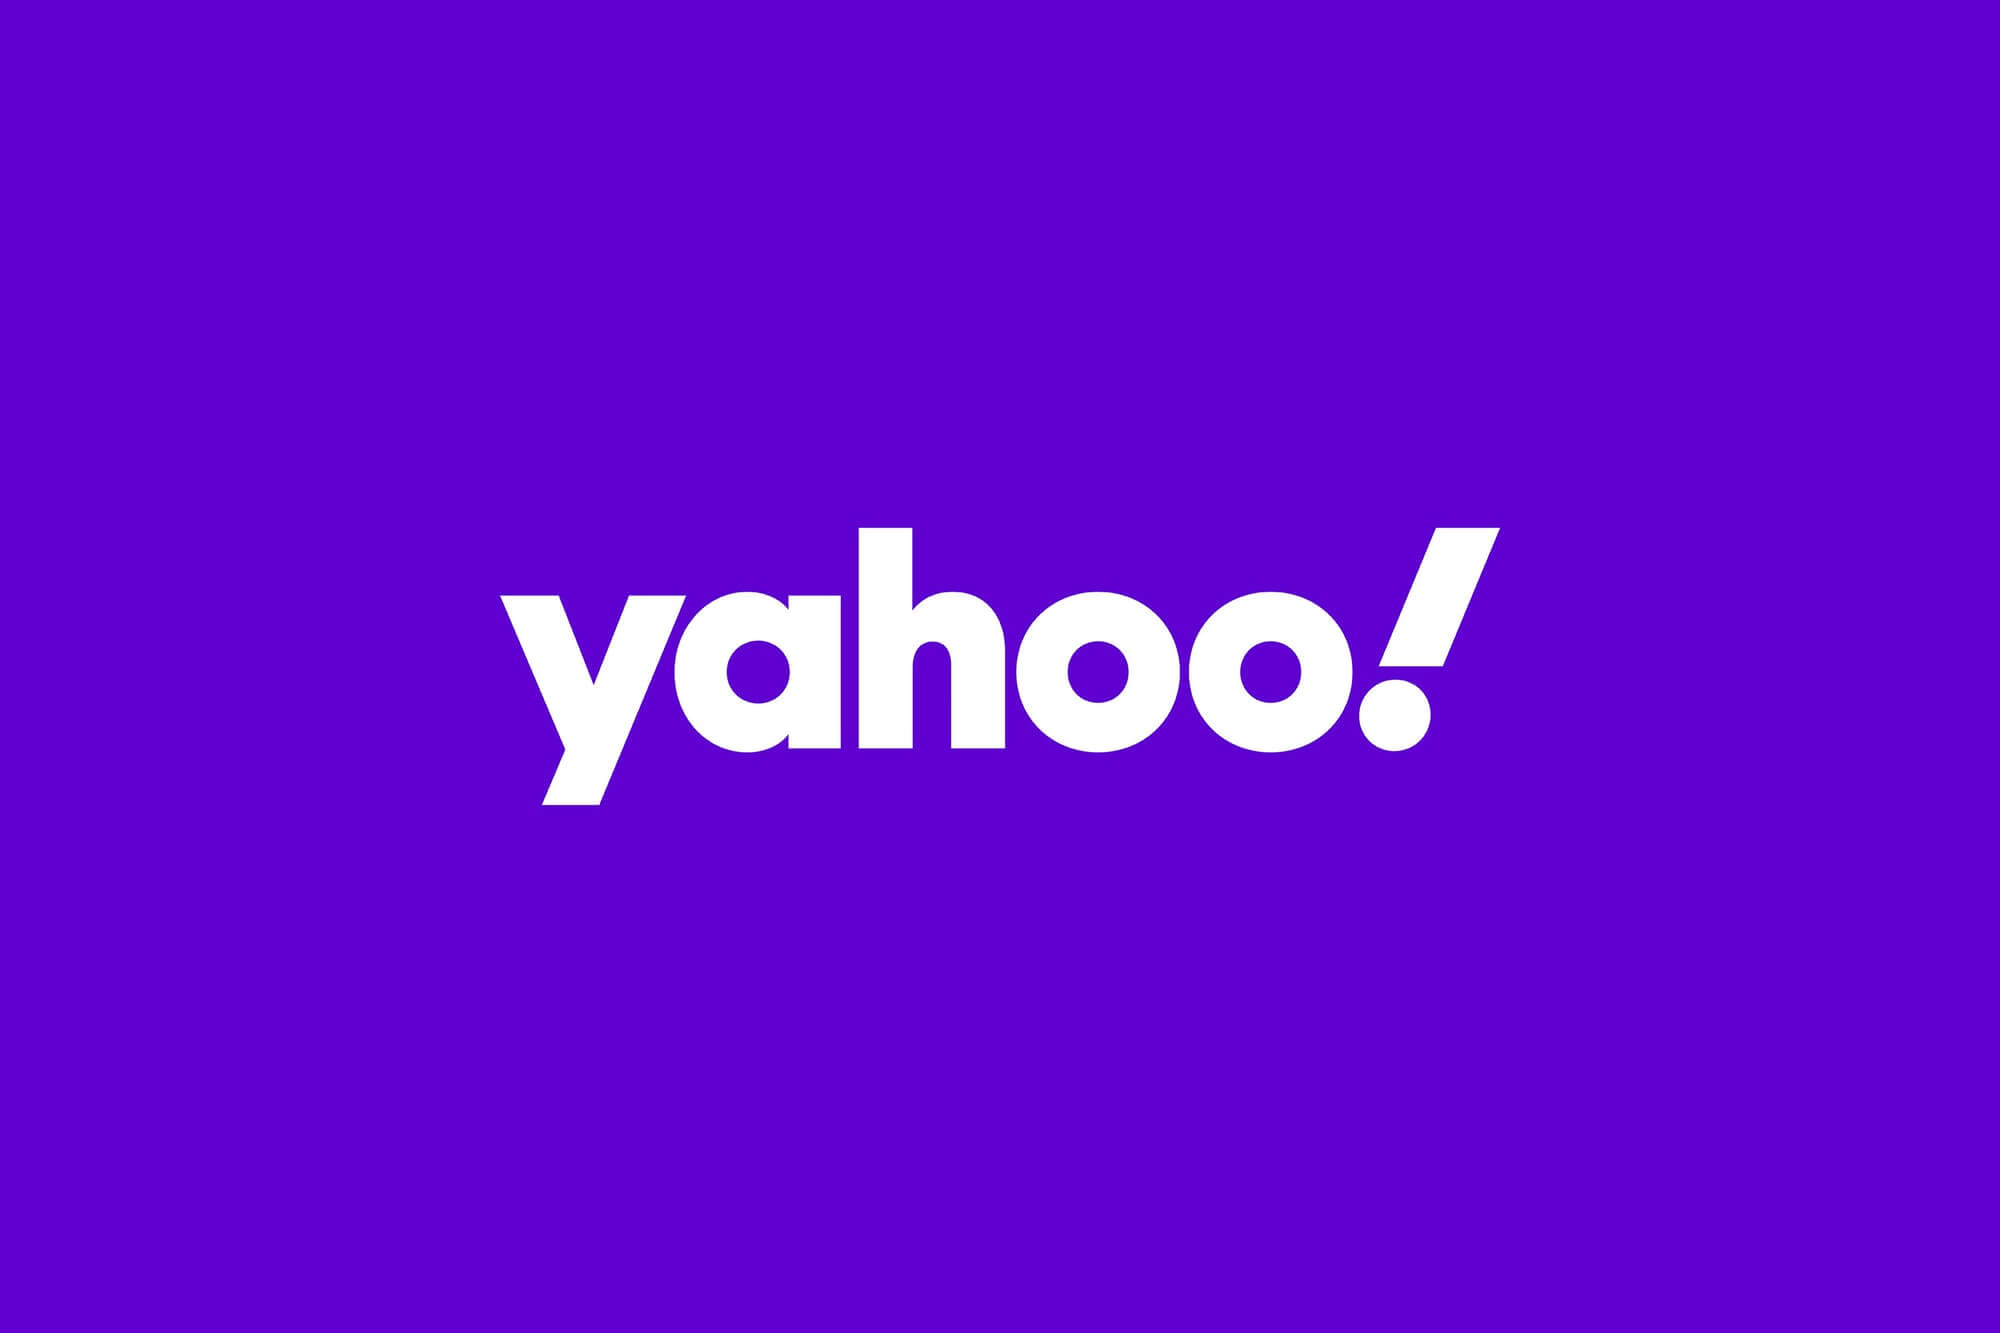 Yahoo ceases service in China on account of “interesting” alternate and factual ambiance